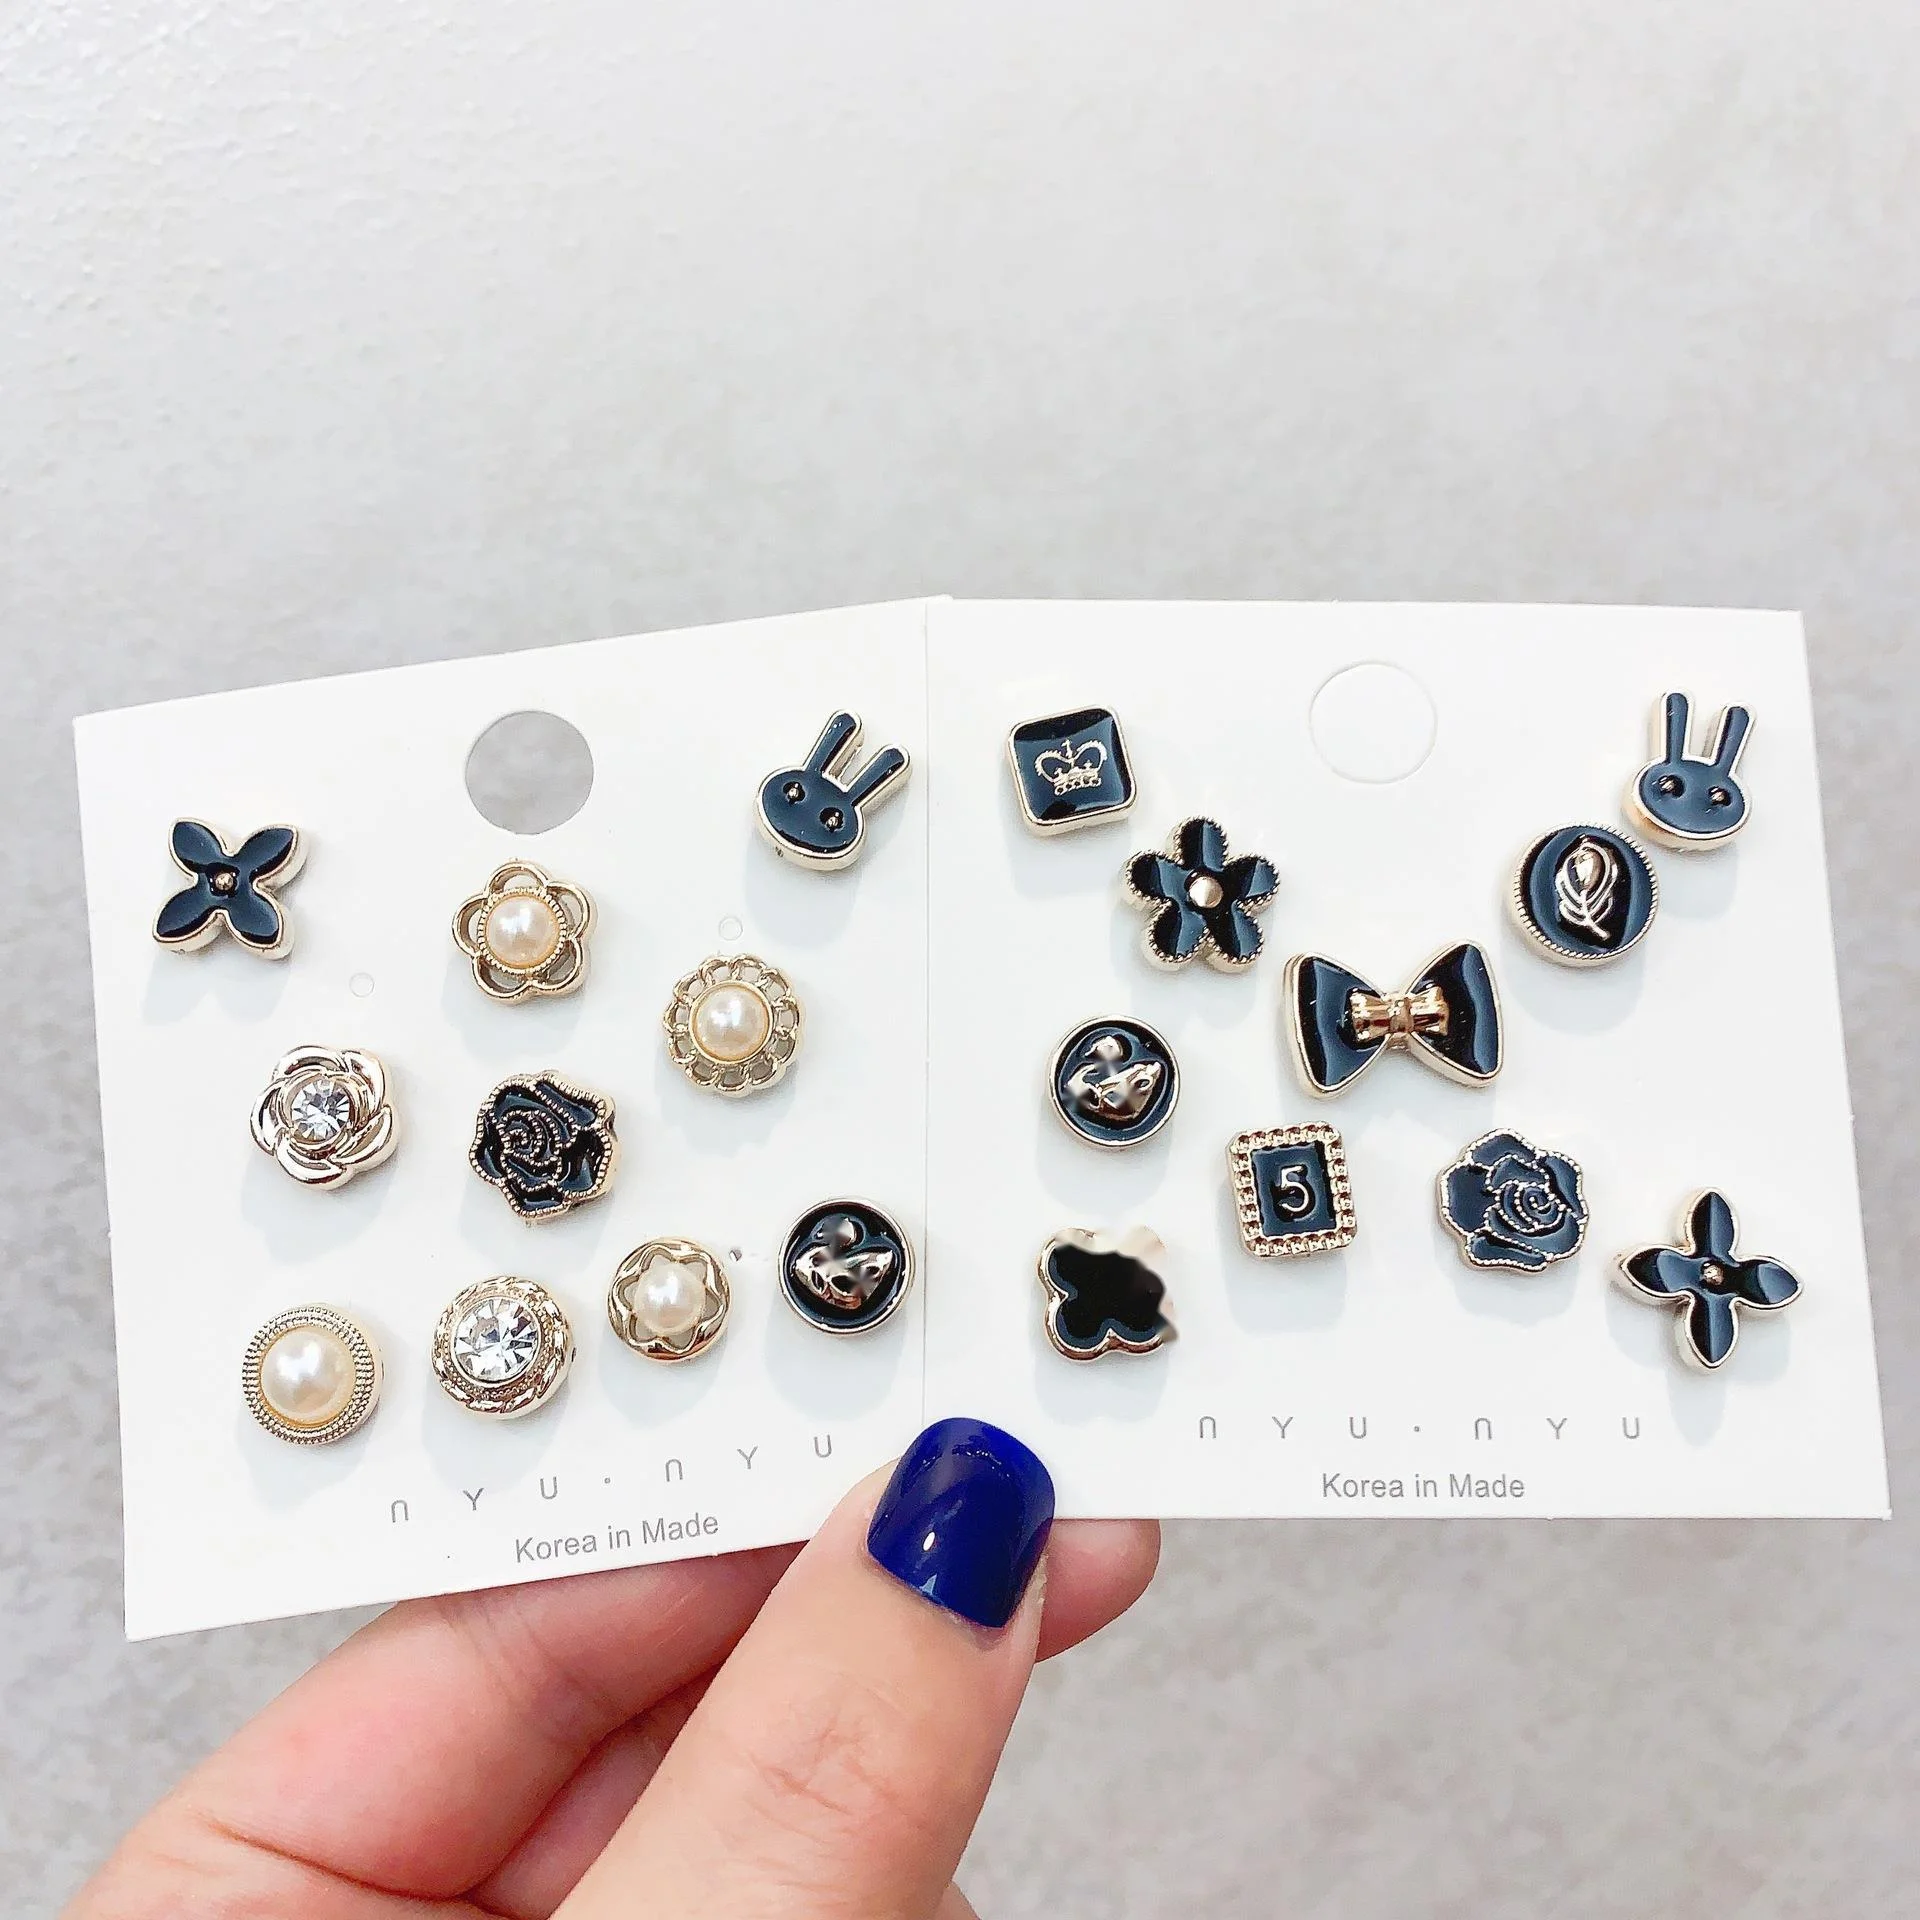 Simple Korean Ins Seamless Brooch Buttons Suit Anti Exposure Pins Cute Small Geometric Pearls Brooches Buckles 10pcs/set |